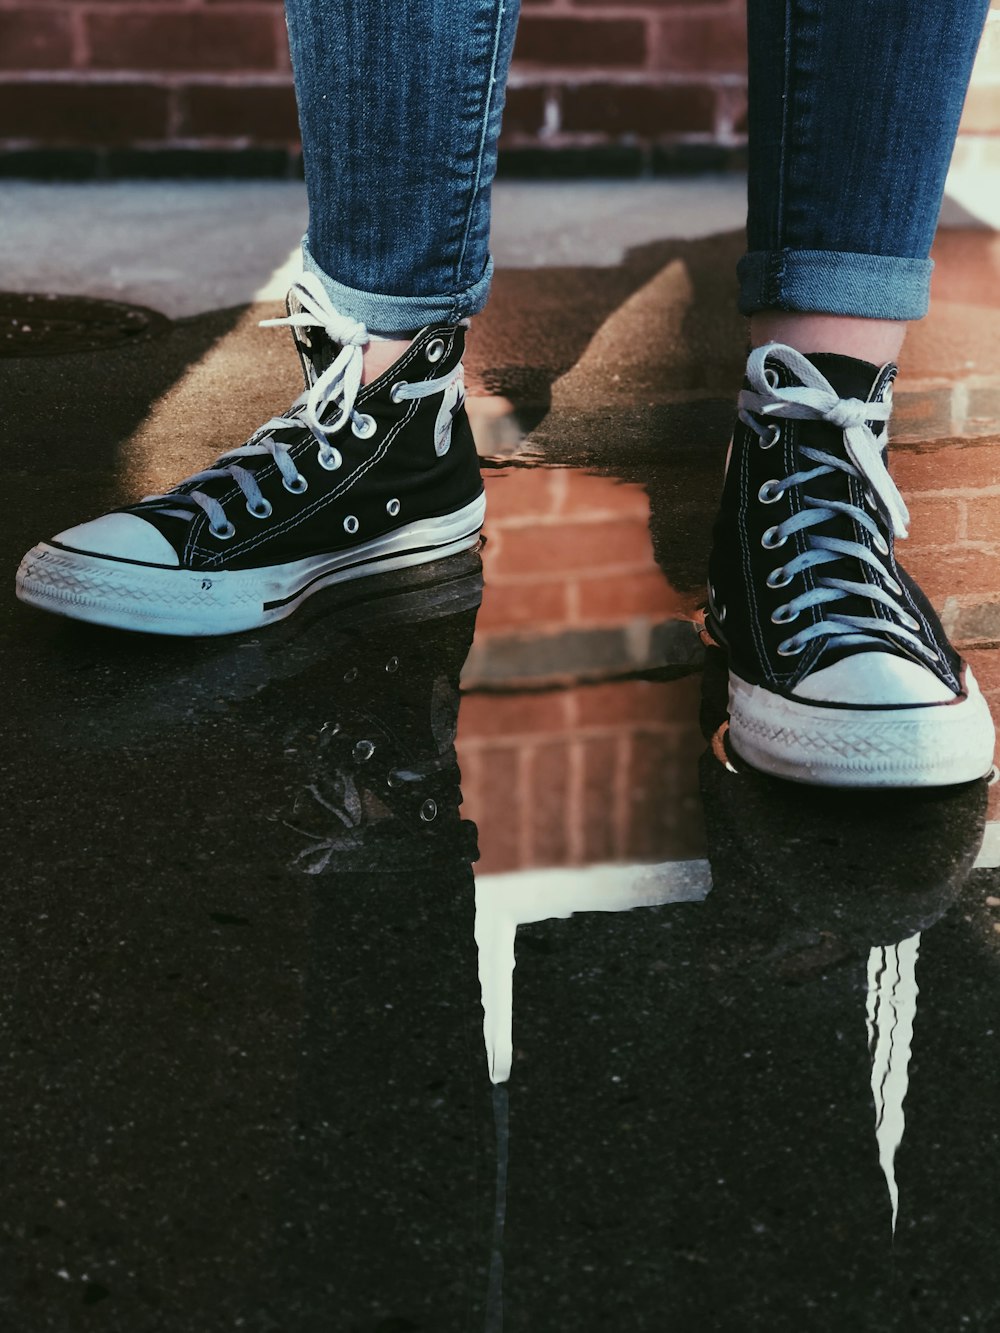 person wearing black high-top sneakers photo – Free Image on Unsplash